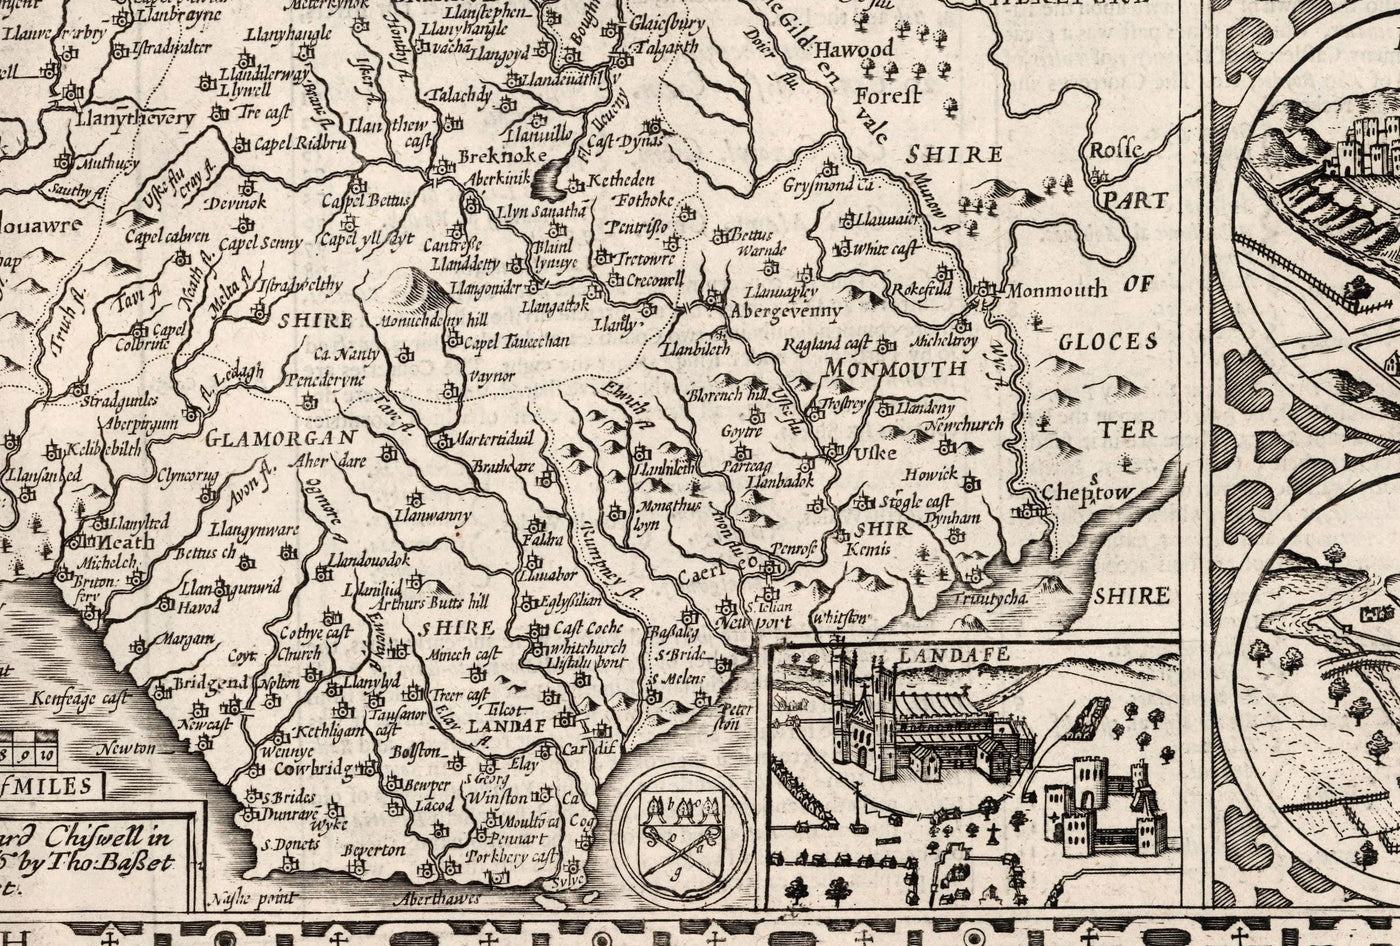 Old Monochrome Map of Wales, Cymru, 1611 by John Speed - Cities, Towns, Counties, Cardiff, Pembrokeshire, Anglesey